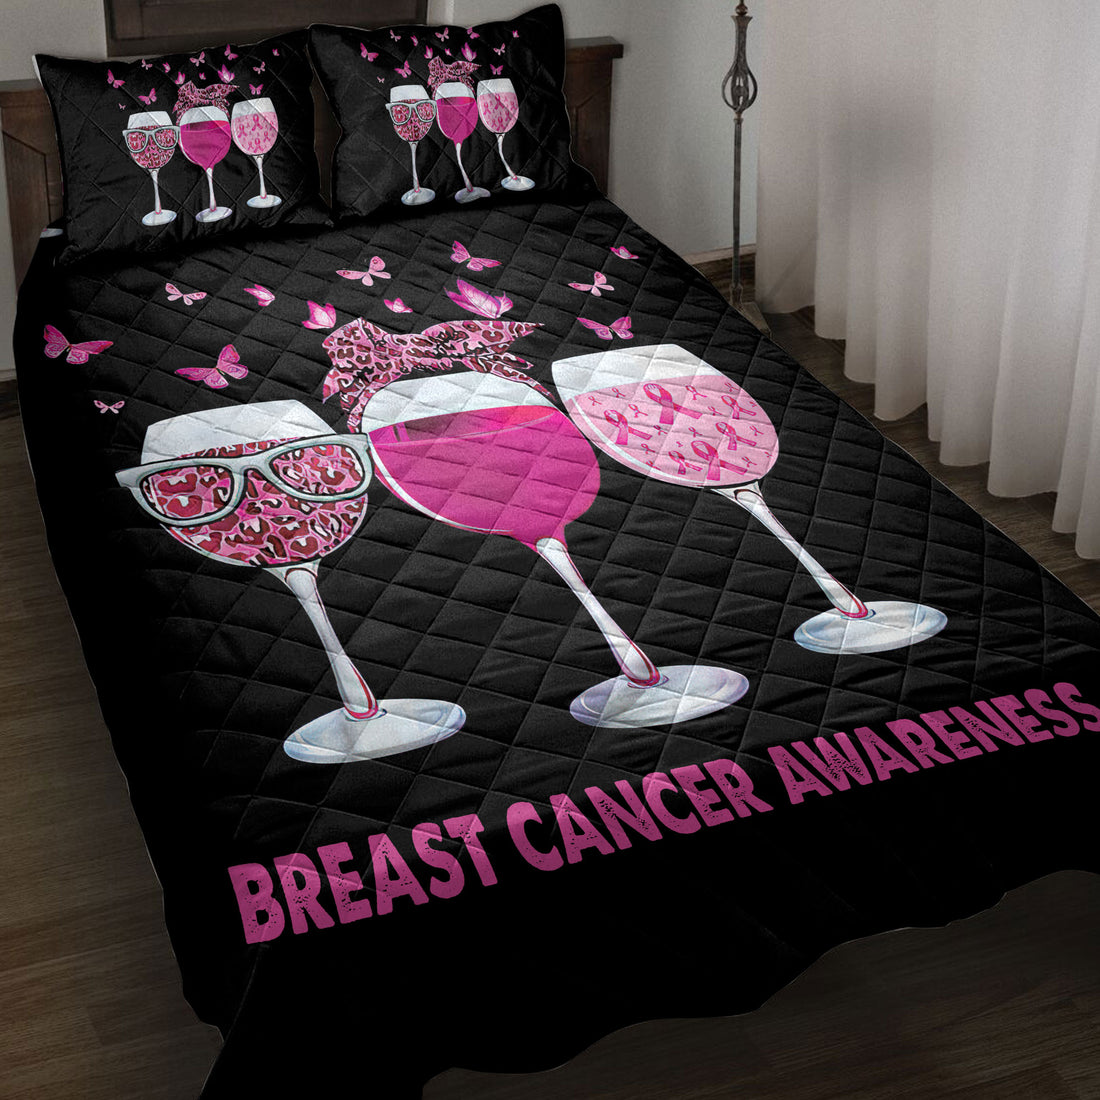 Ohaprints-Quilt-Bed-Set-Pillowcase-Breast-Cancer-Awareness-Ribbon-Goblets-Blanket-Bedspread-Bedding-3839-Throw (55'' x 60'')